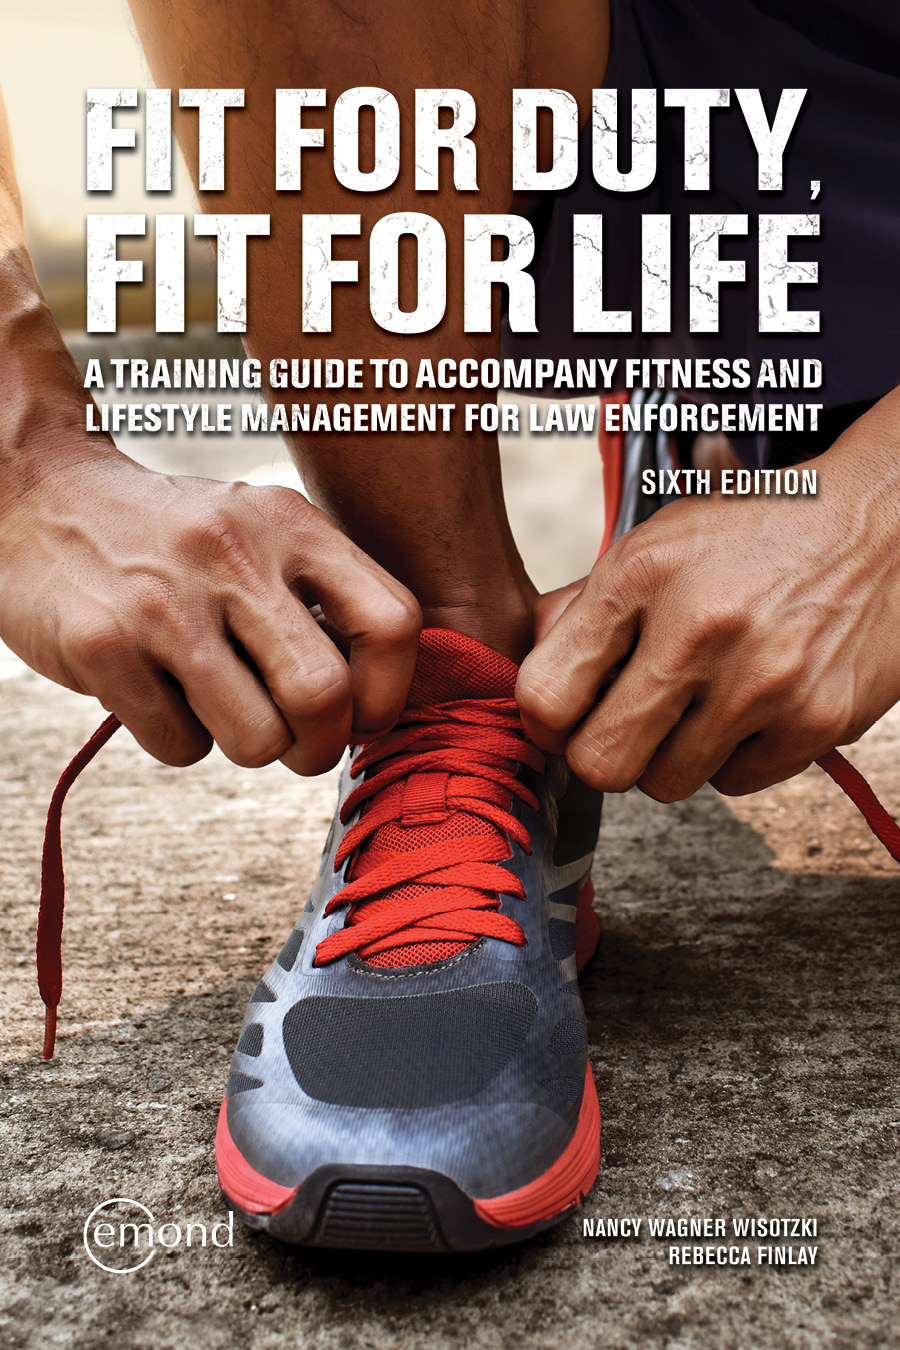 Fit for Duty, Fit for Life (Training Guide), 6th Ed.